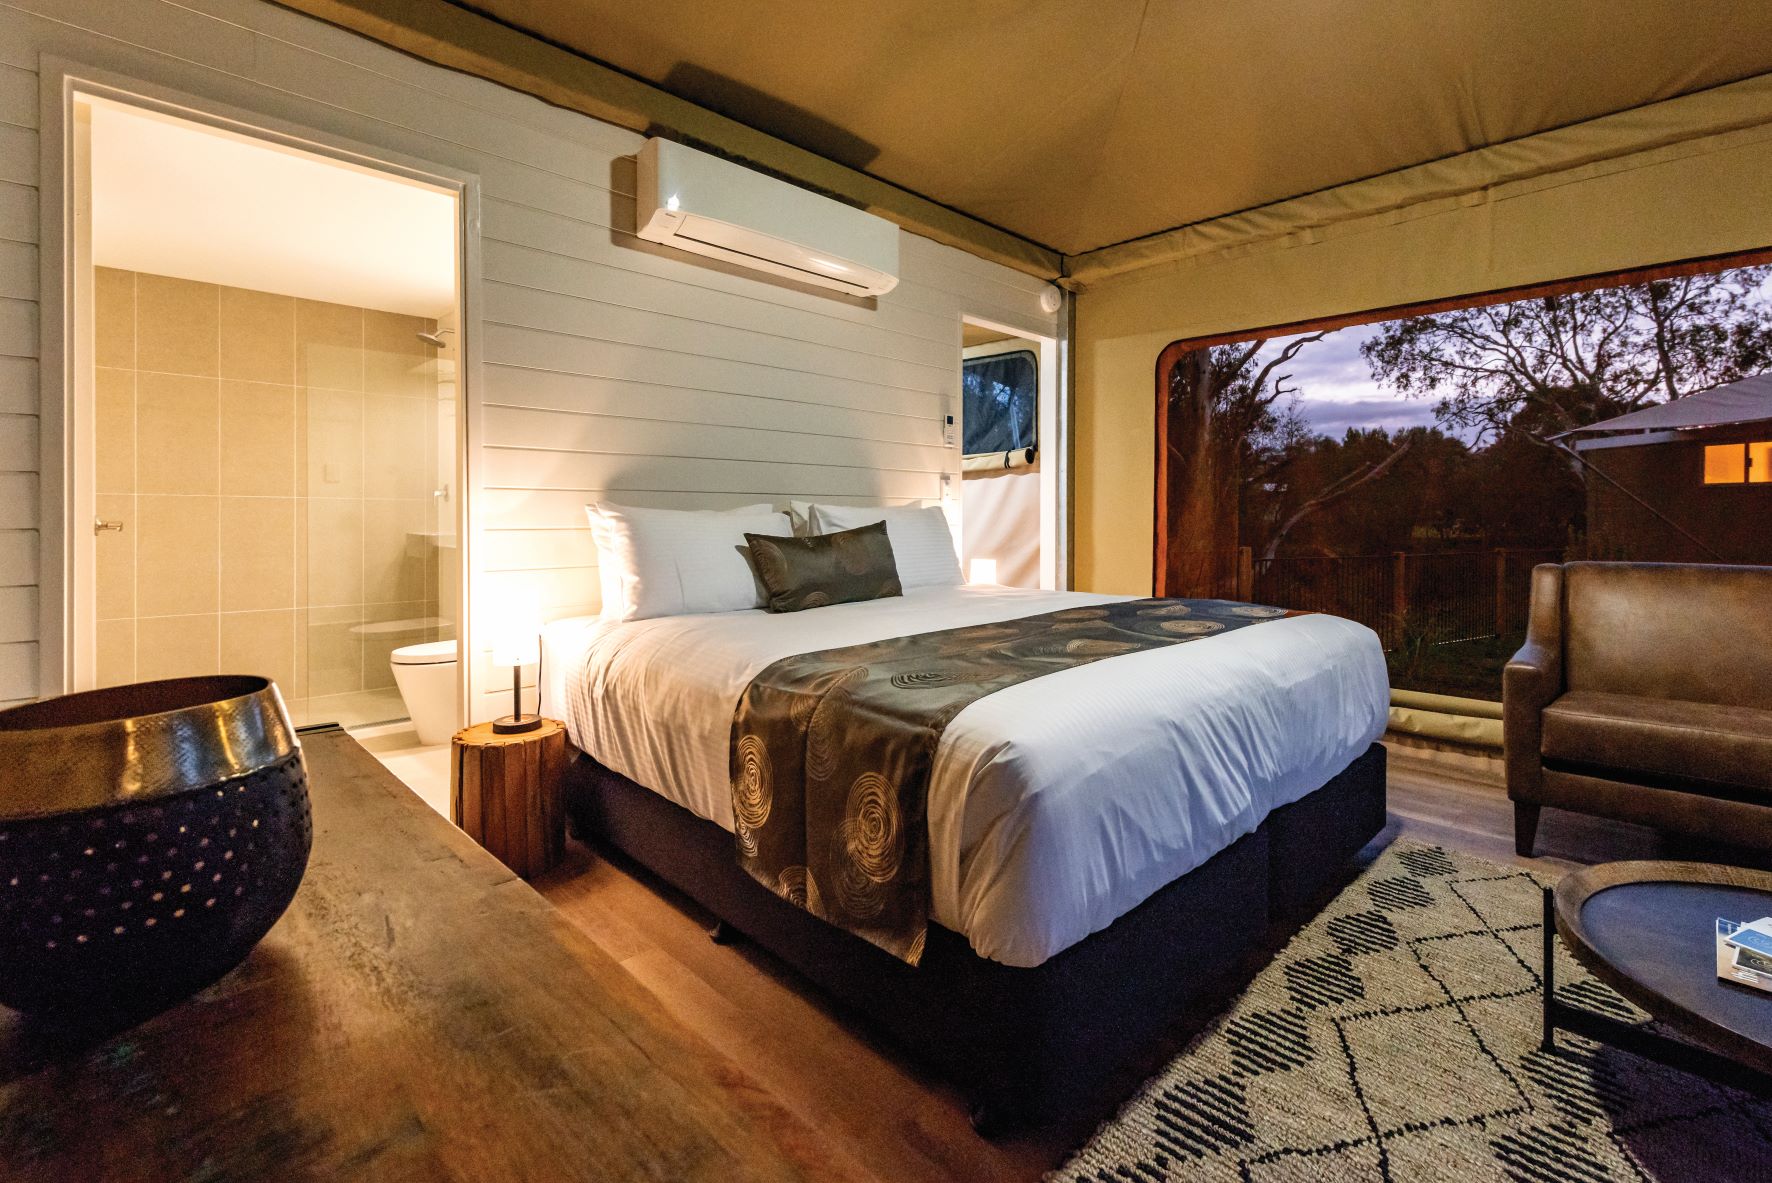 South australias best glamping experiences barossa valley9